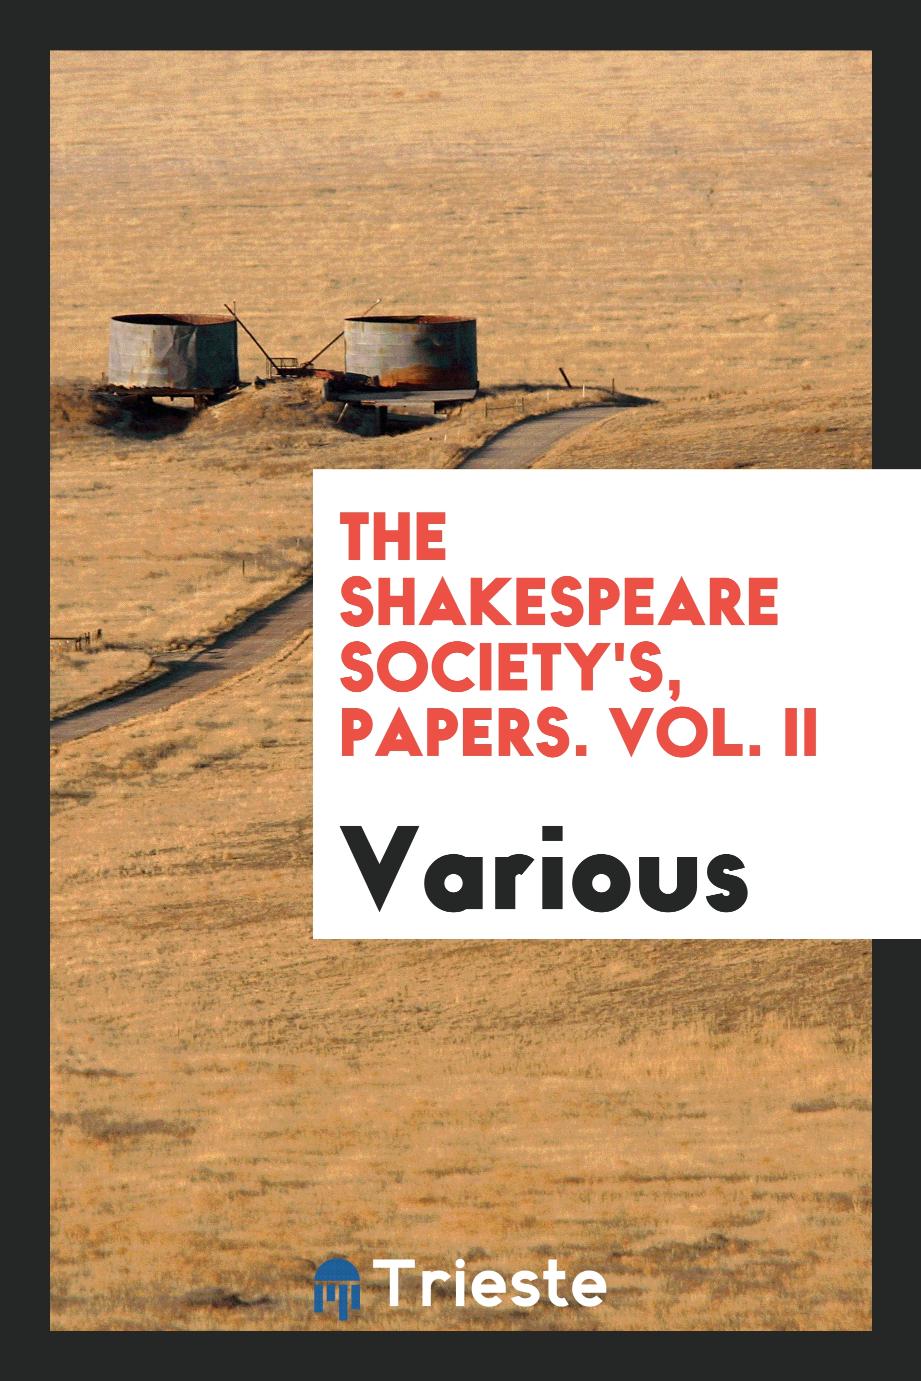 The Shakespeare Society's, Papers. Vol. II